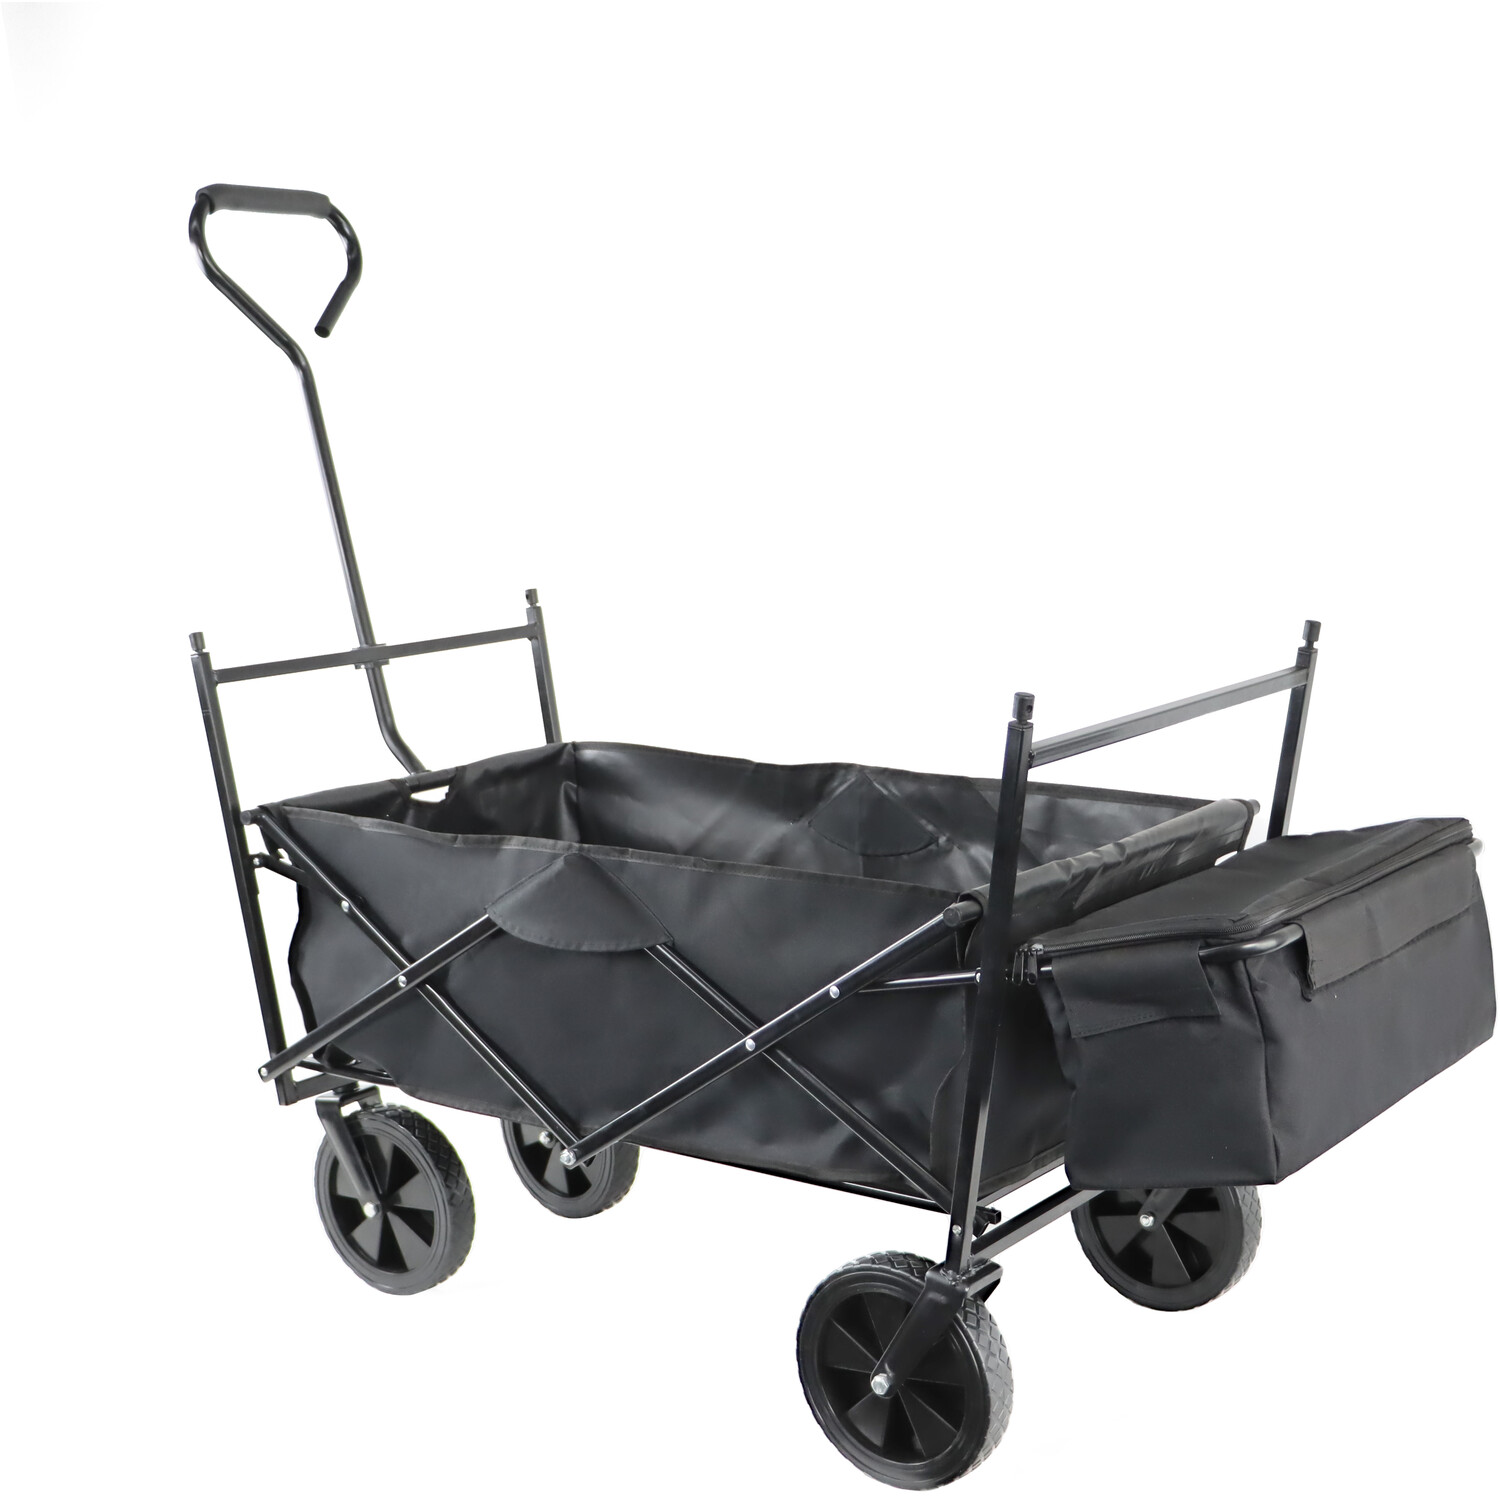 Foldable Trolley with Canopy - Black Image 3